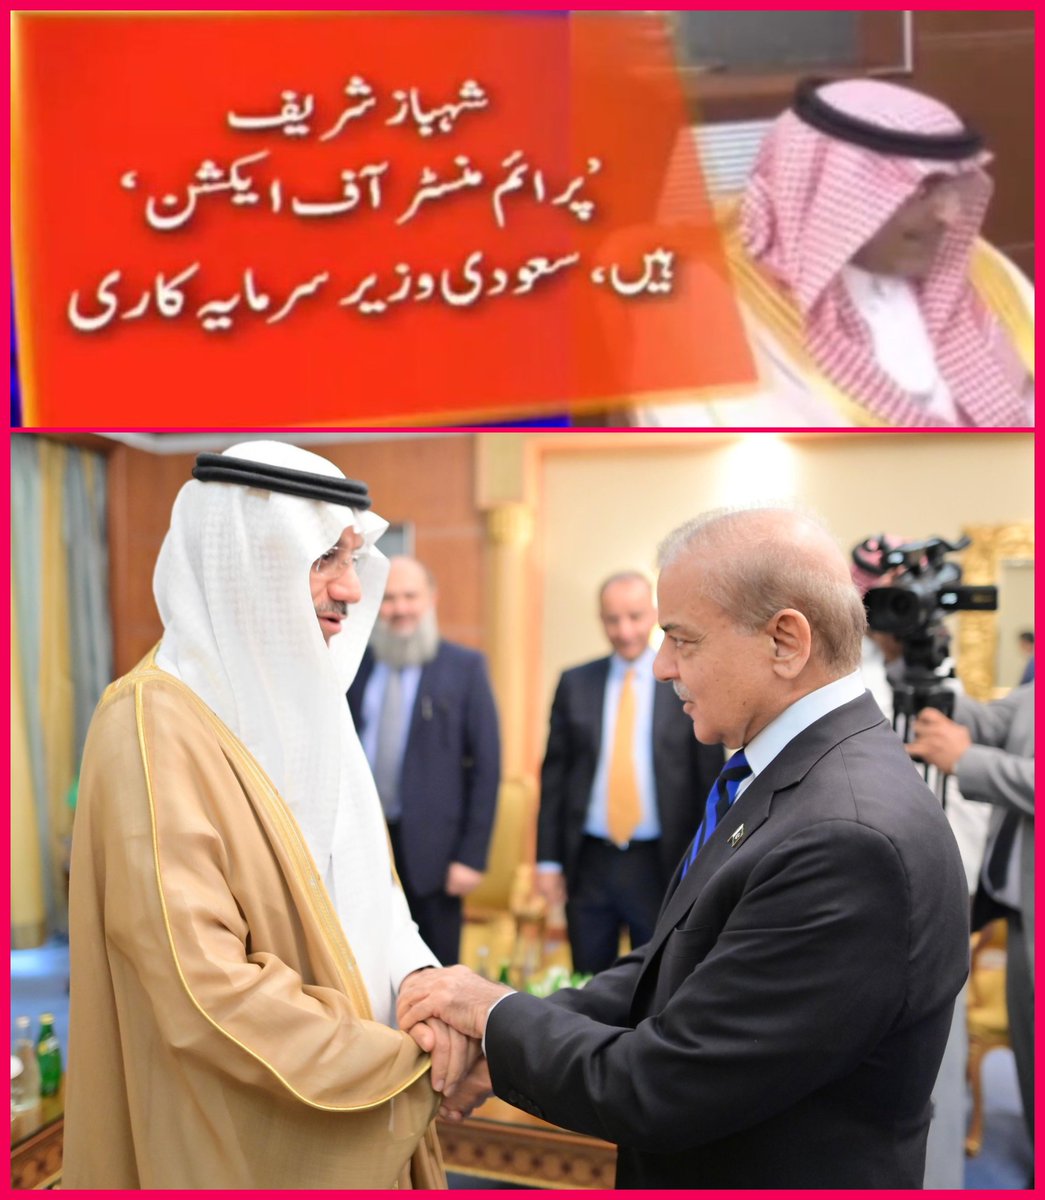 After being called “Shehbaz Speed” by Chinese leaders, Saudi leaders said, “Shehbaz Sharif is the Prime Minister of Action”. This is all because of his extraordinary skills and talents, the reason why all world leaders get impressed by Shehbaz Sharif. Kaam bolta hai kaam! 🇵🇰